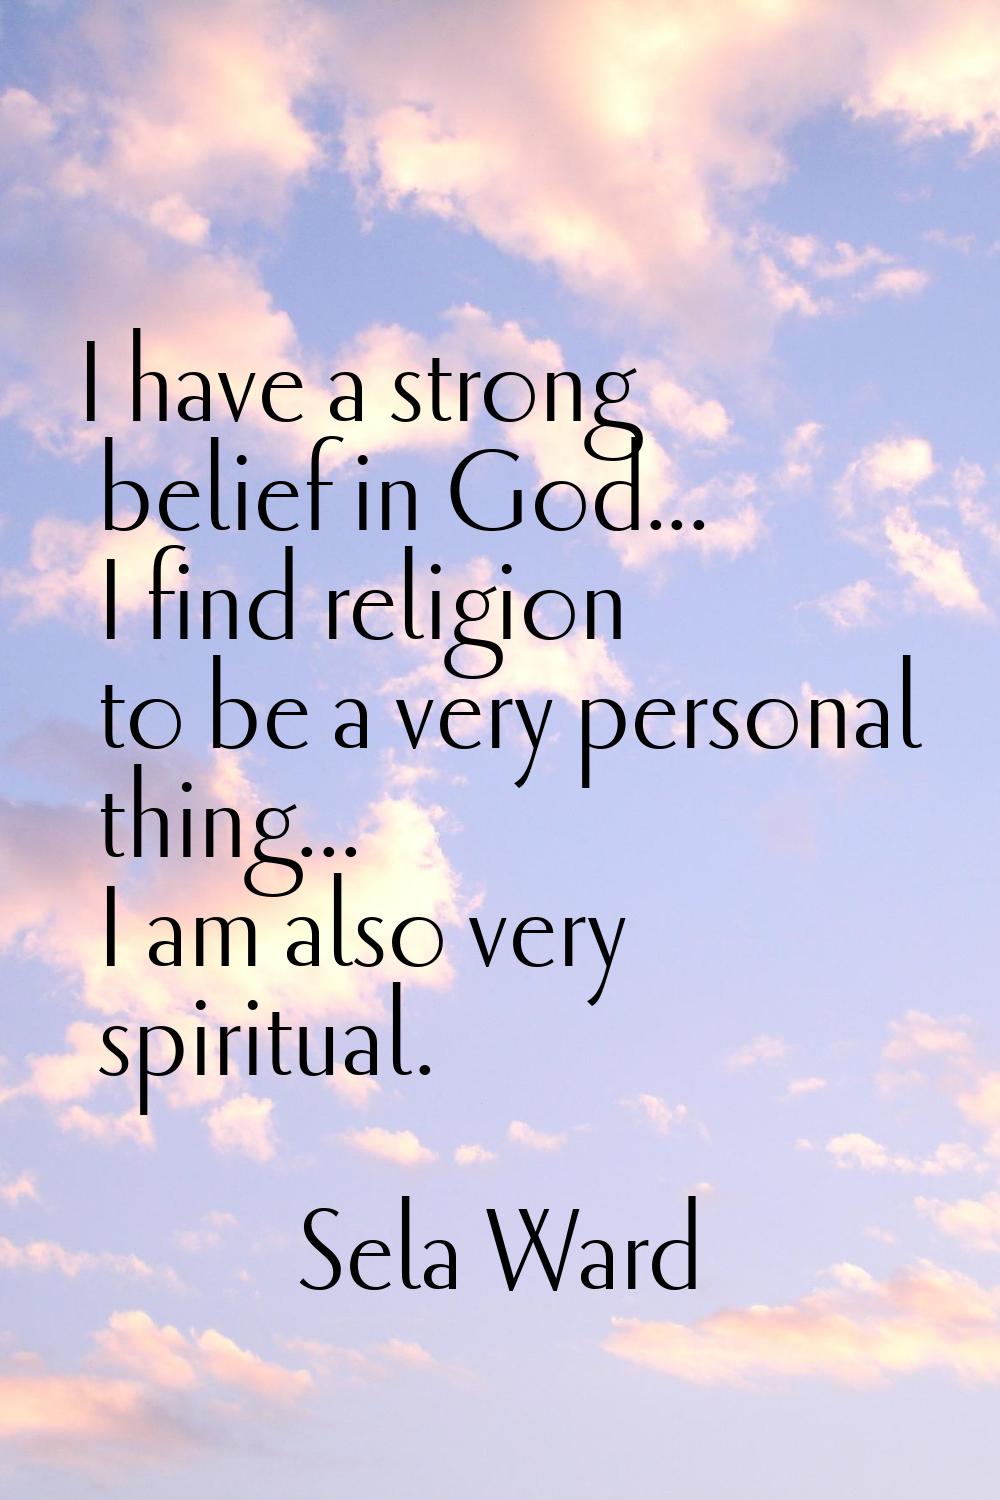 I have a strong belief in God... I find religion to be a very personal thing... I am also very spir